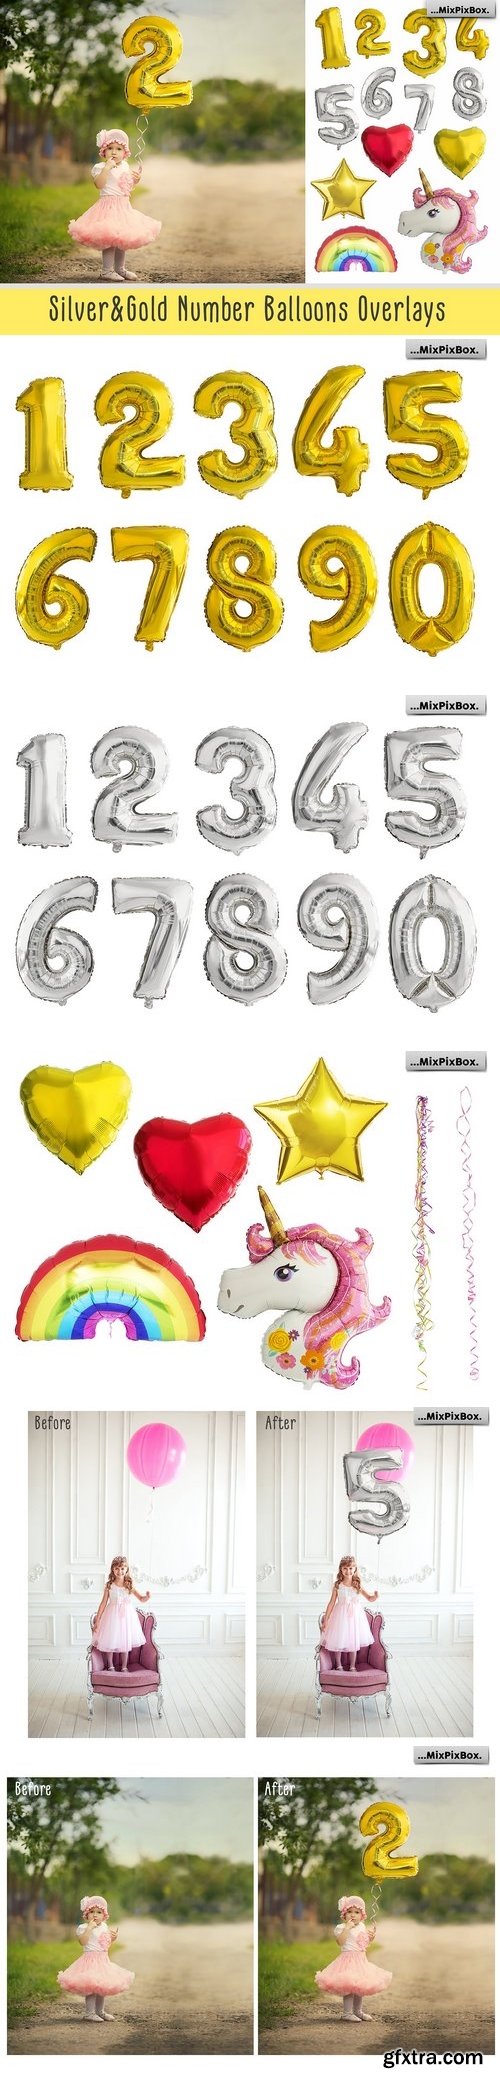 CM - Shaped Number Balloons Overlays 2570490